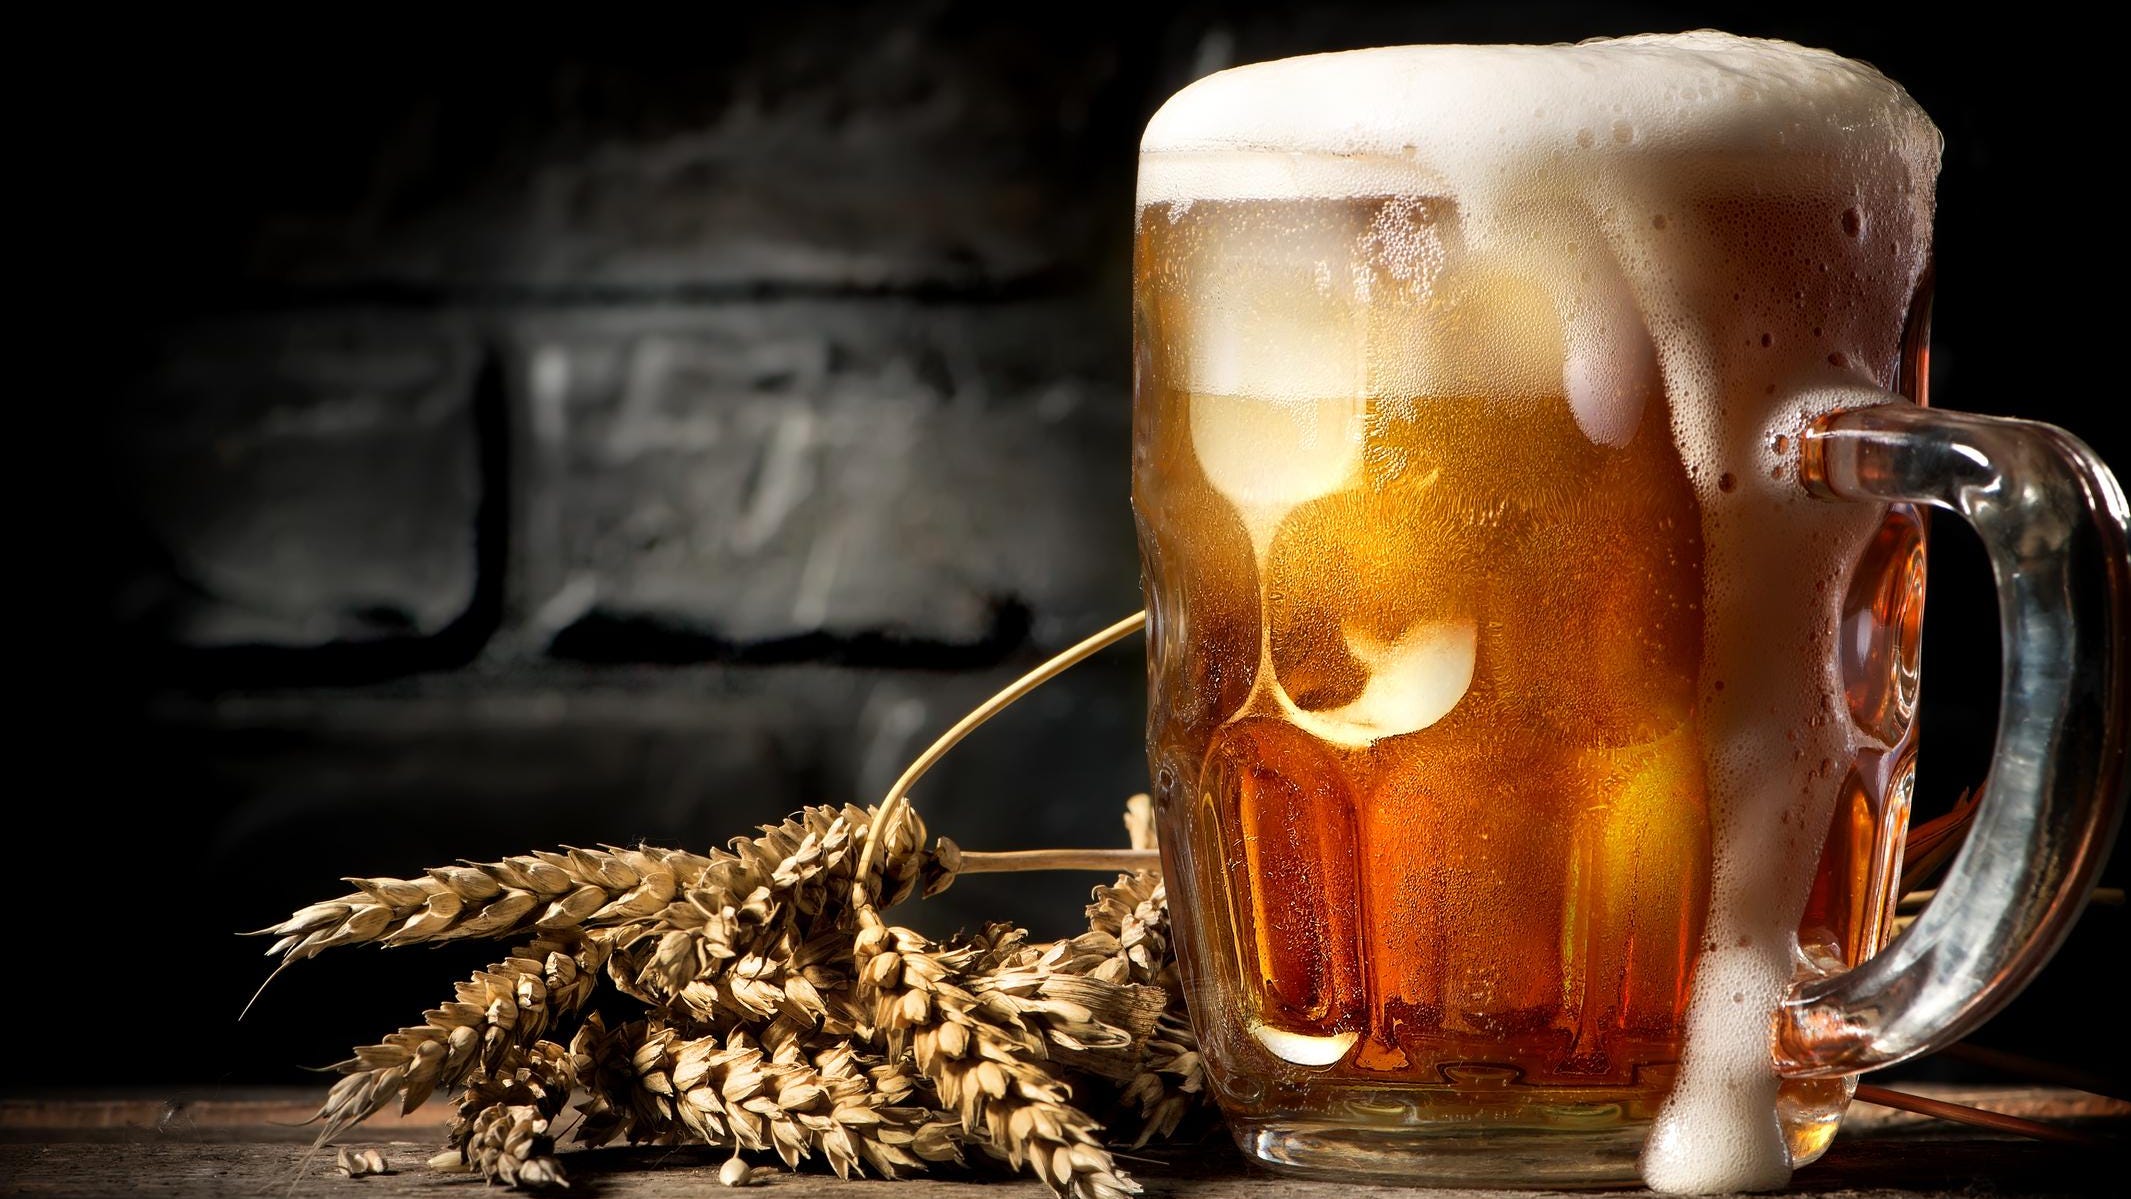 Which Bock beers are best for spring?